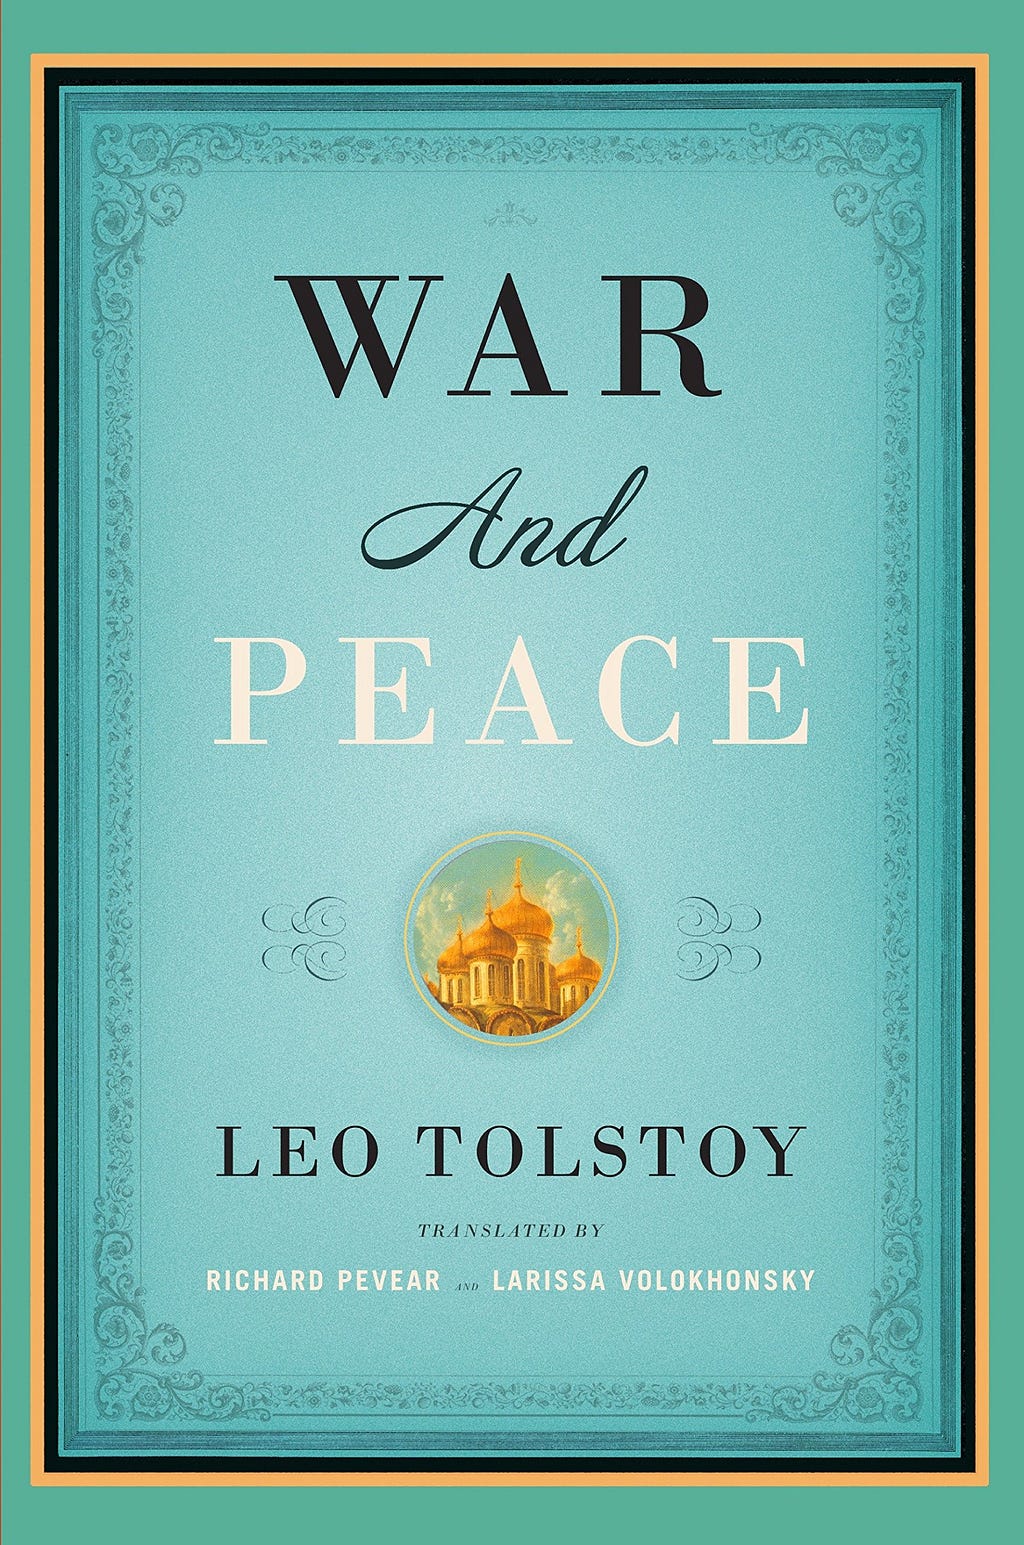 the cover of the book — war and peace